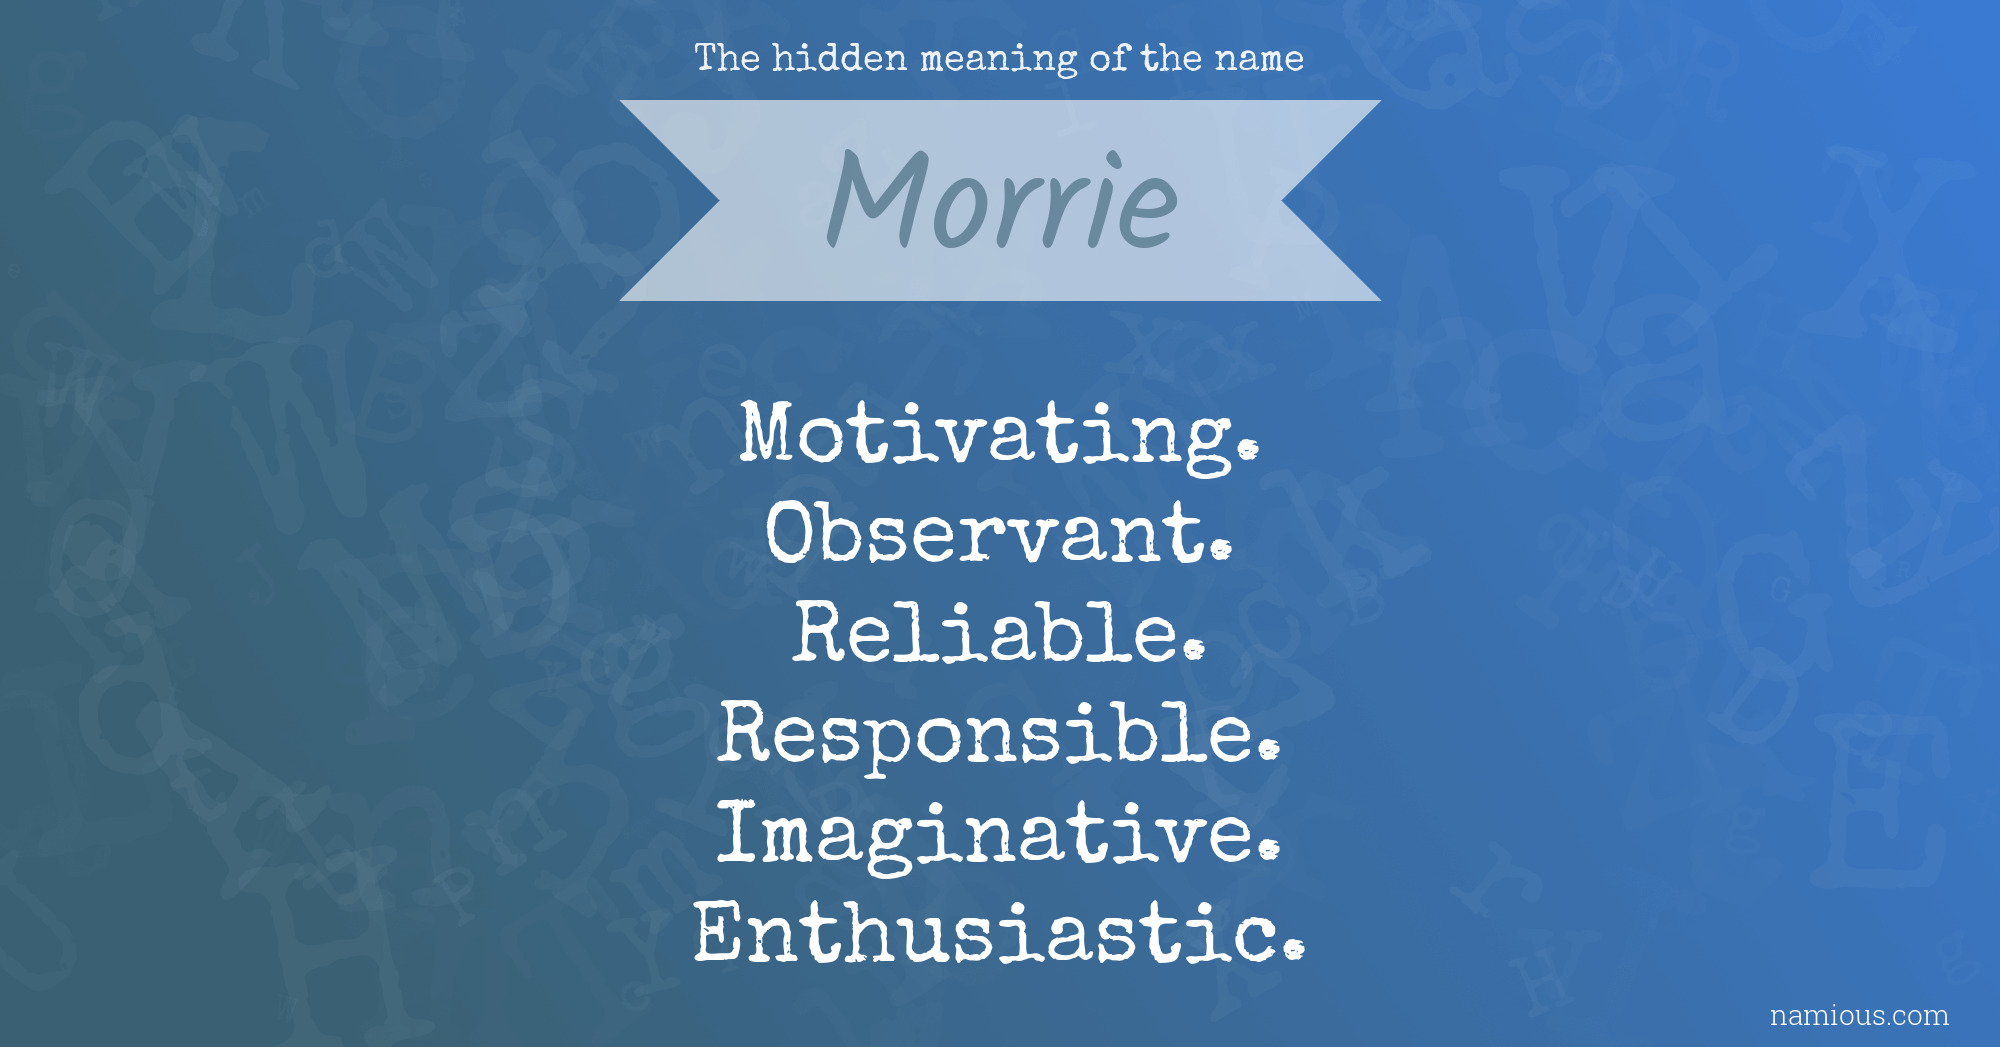 The hidden meaning of the name Morrie